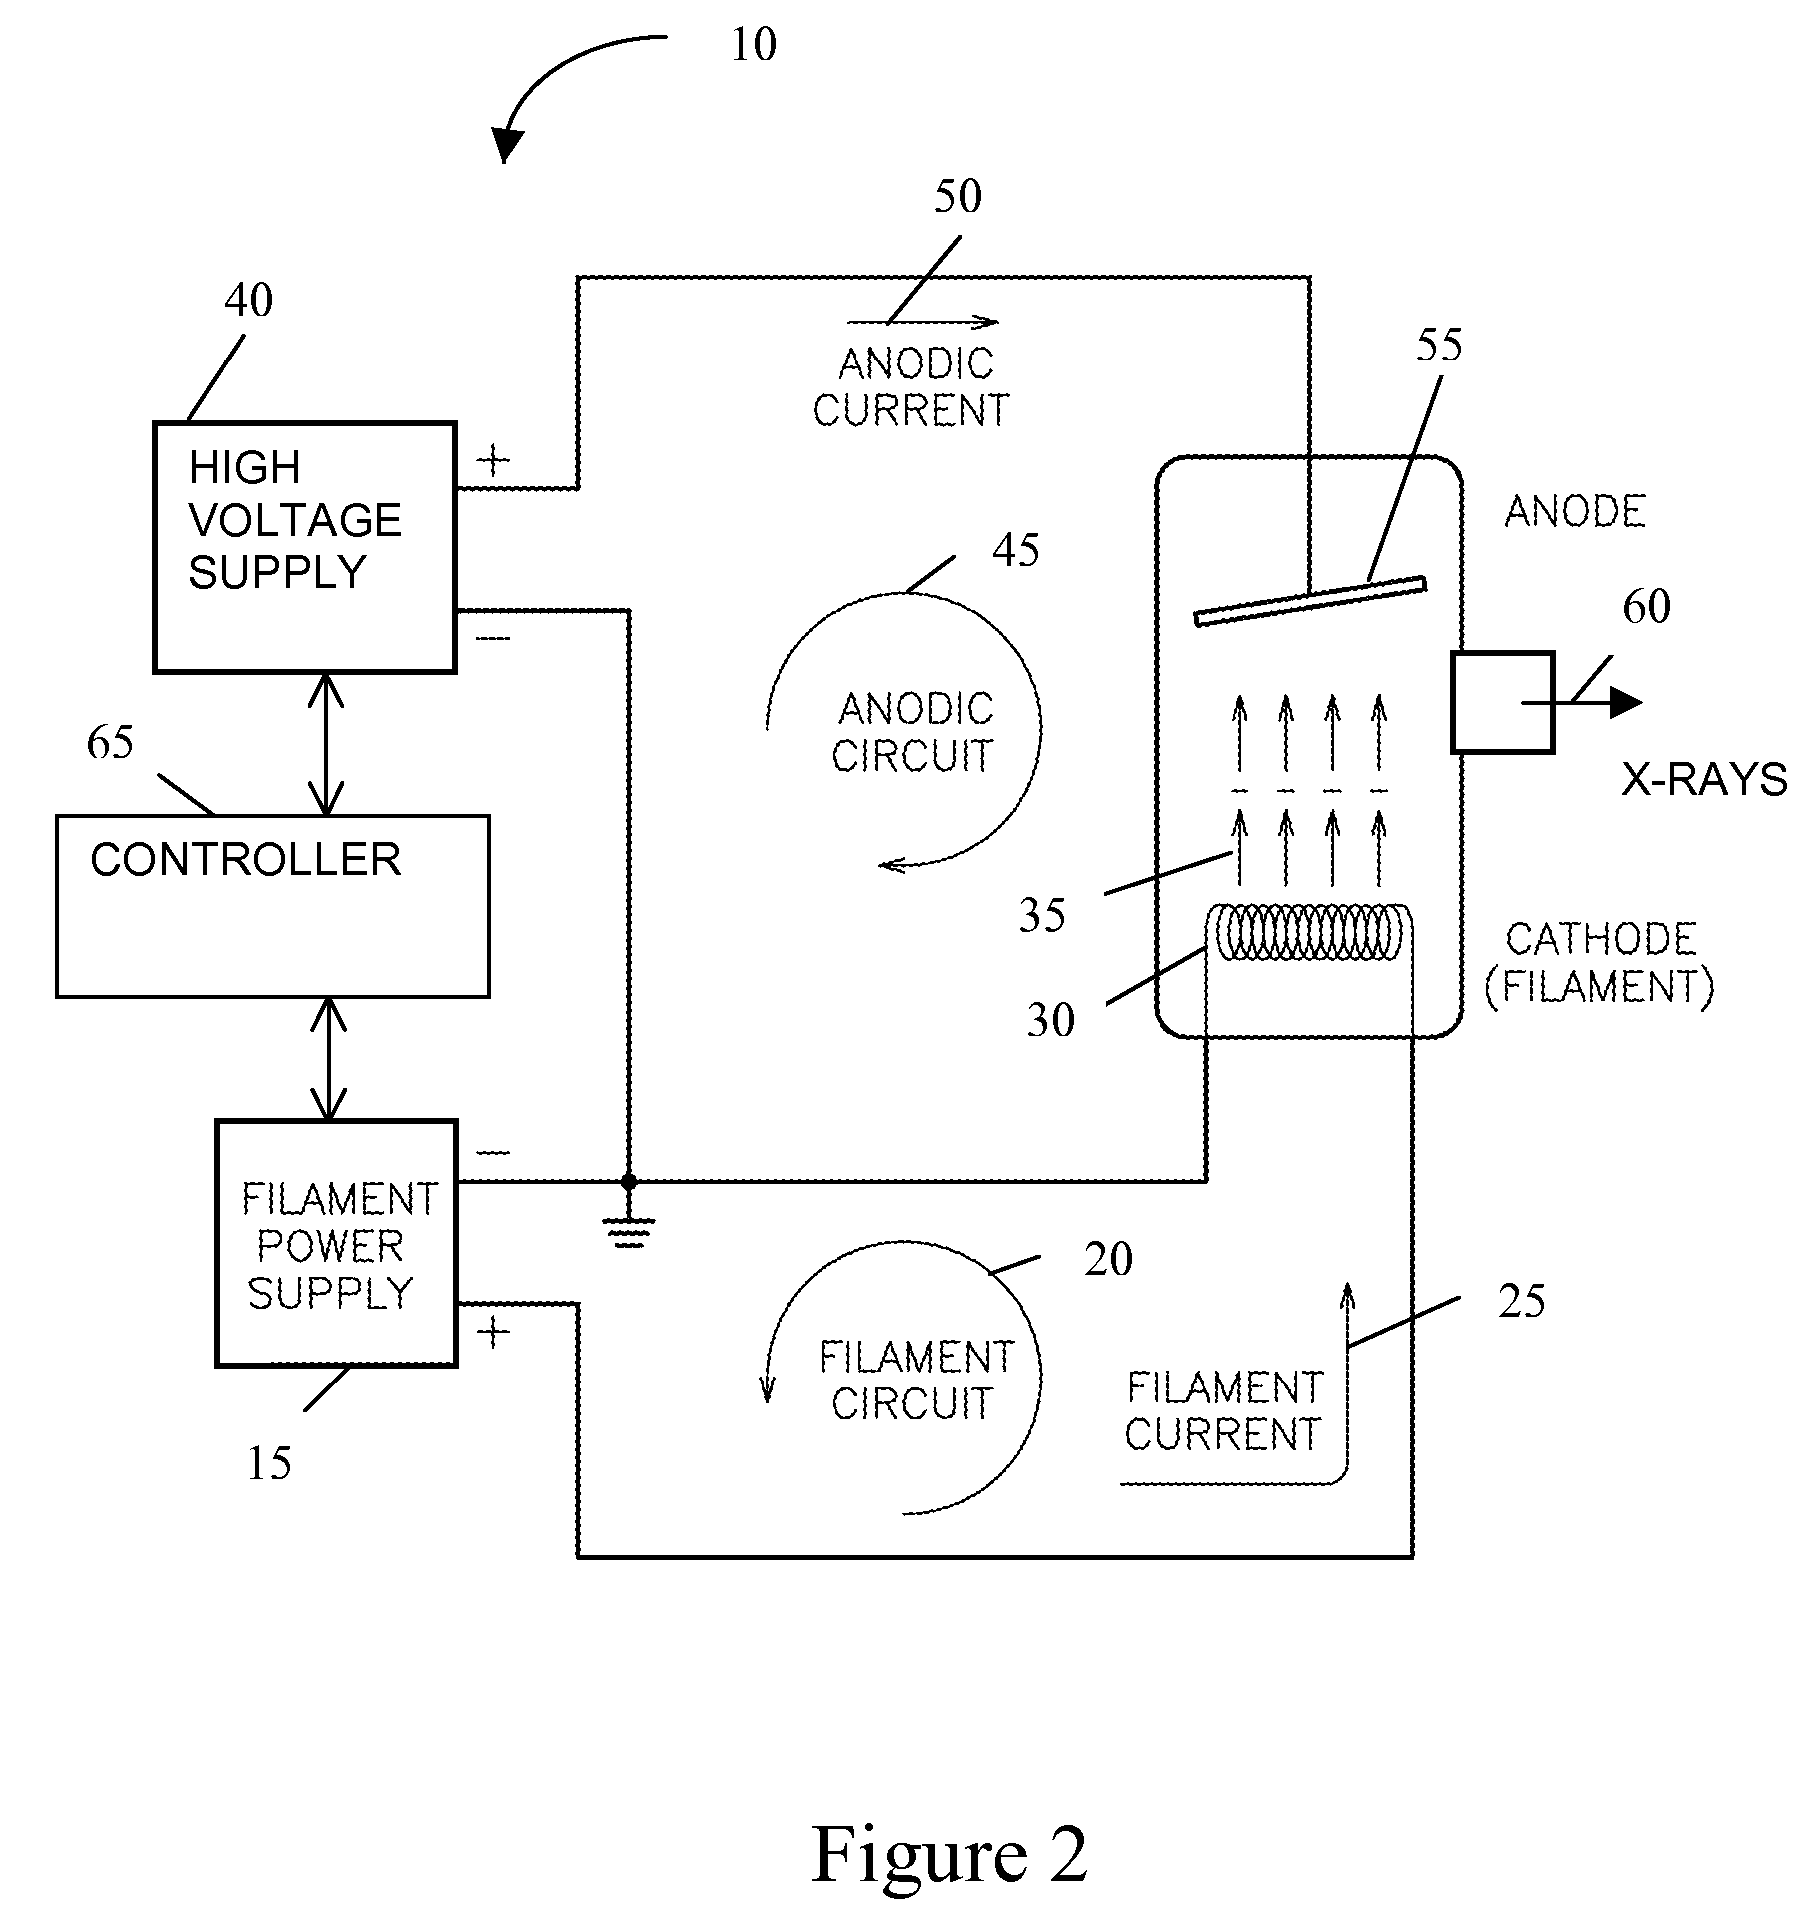 Method to control anodic current in an x-ray source